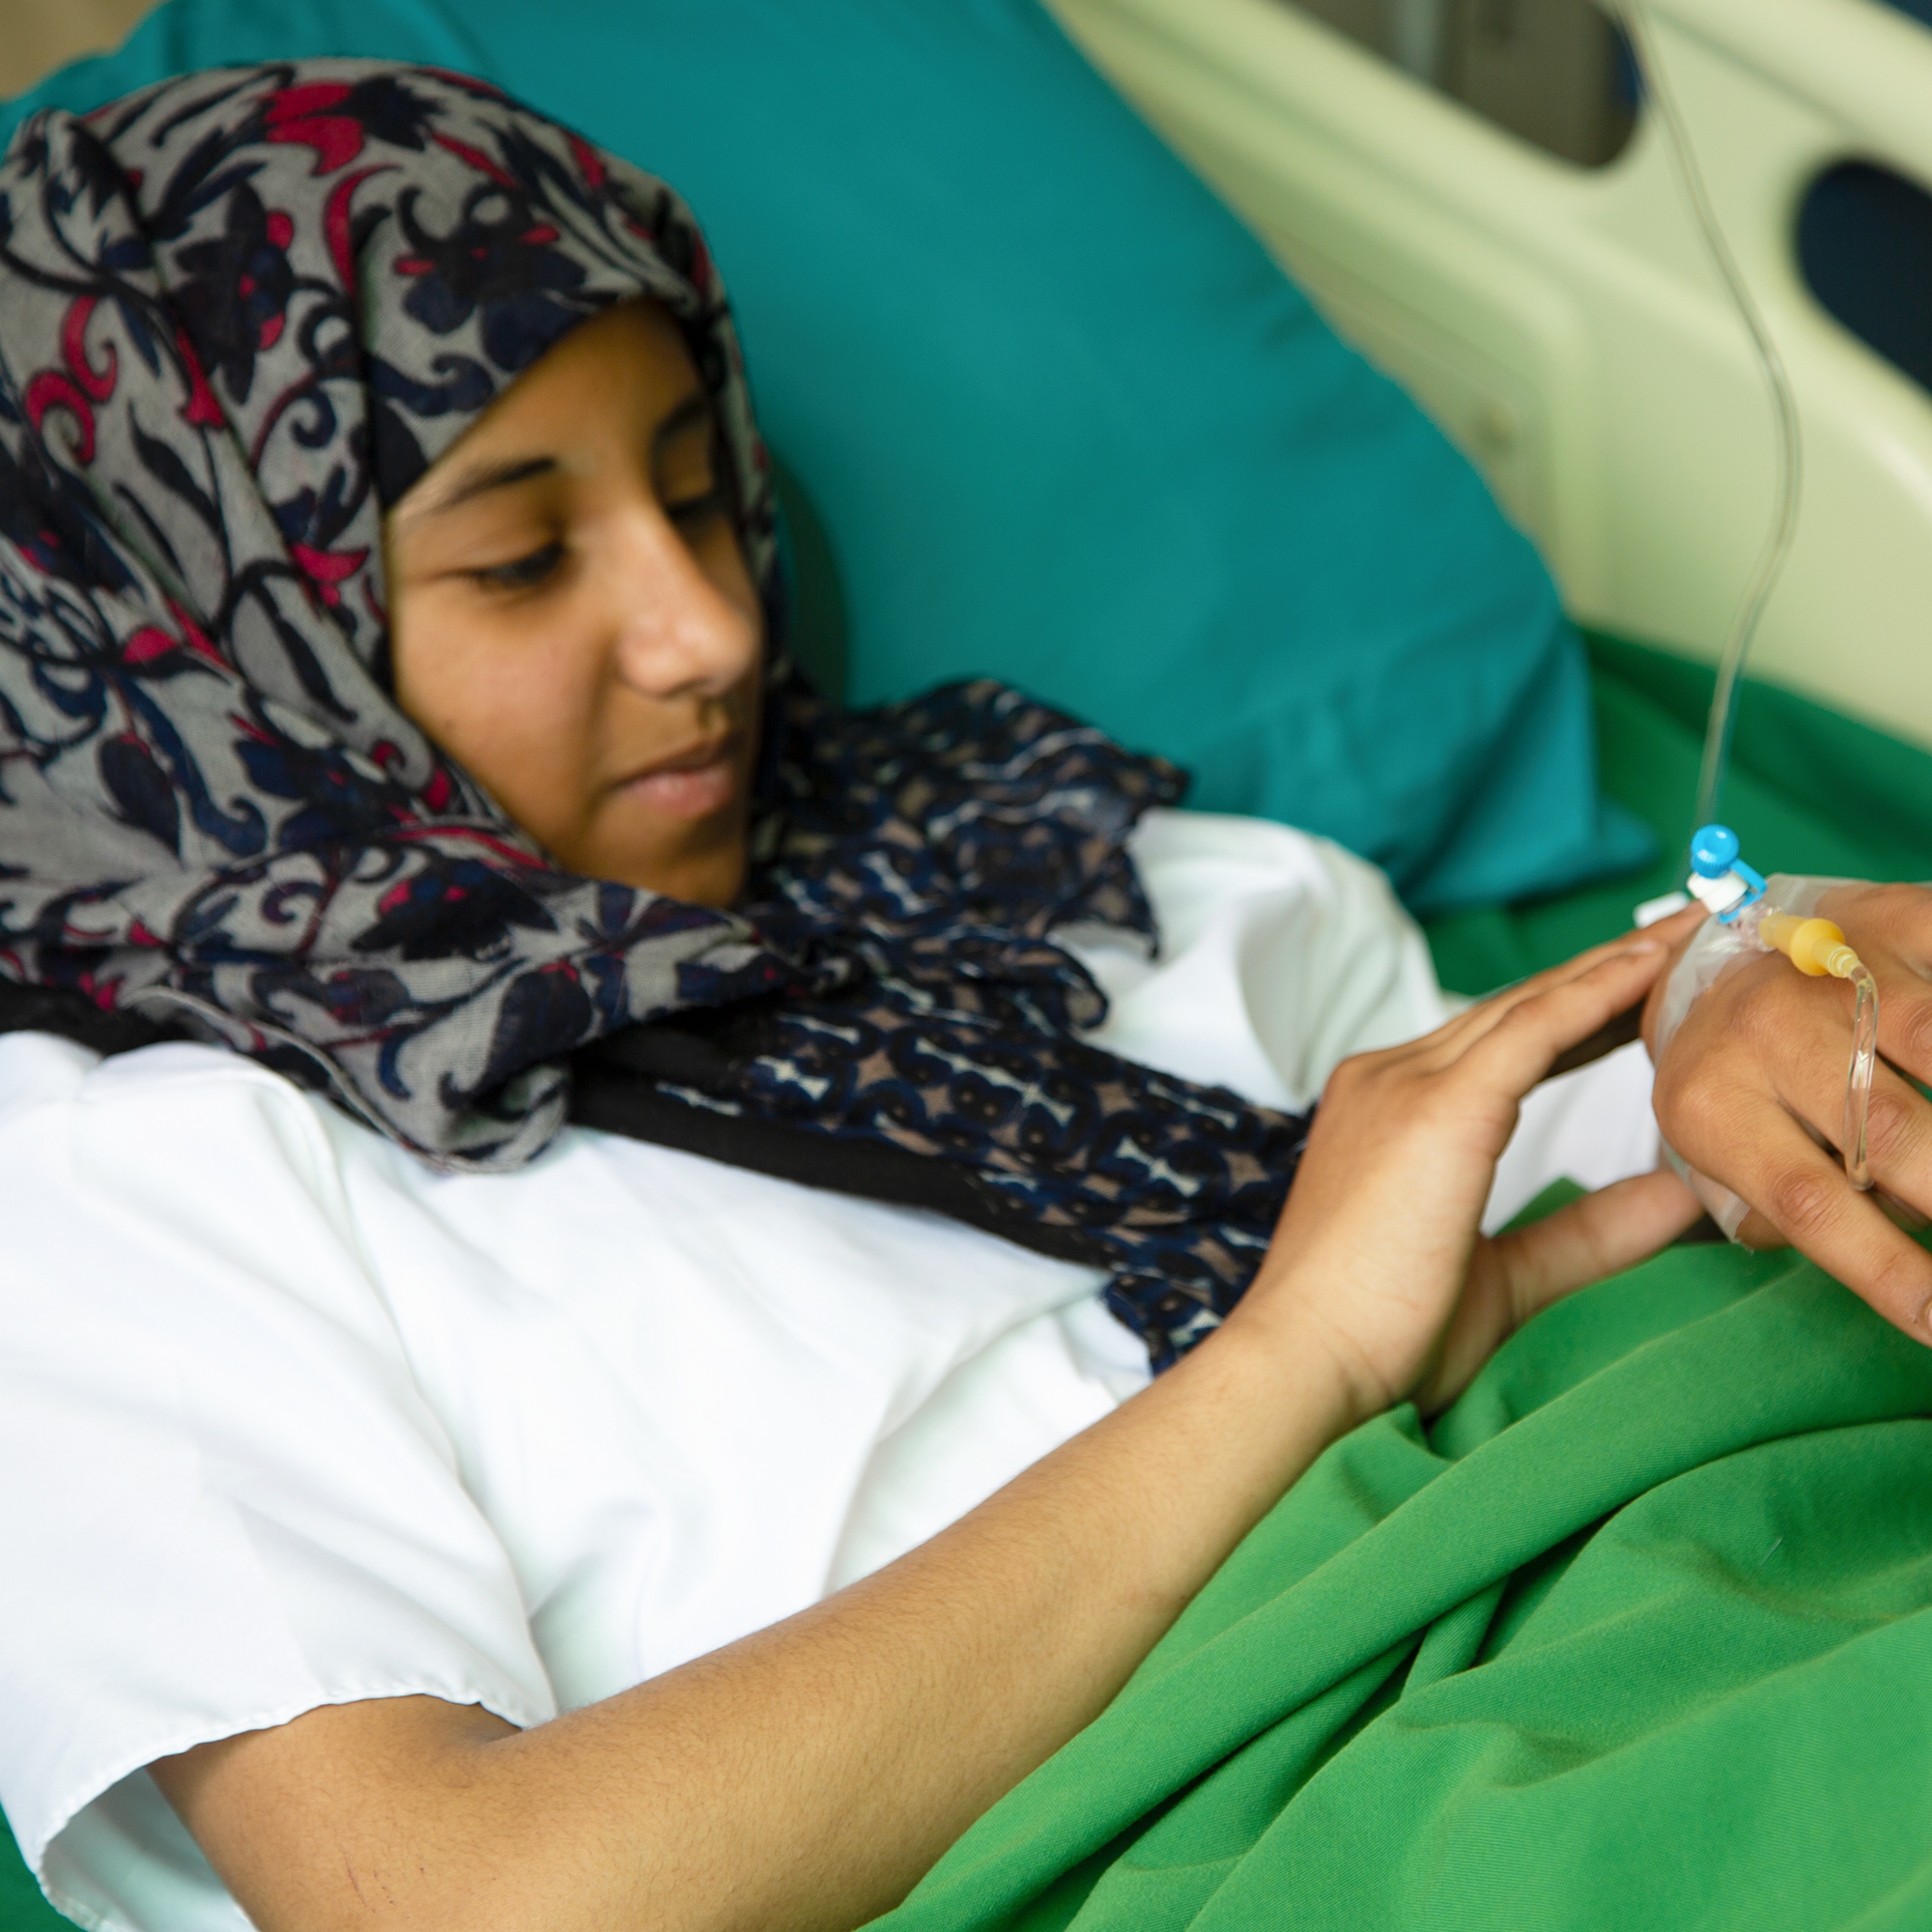 Doaa*, 13 receives treatment following a blast incident that took place at Al Raee school in Sana'a, Yemen which resulted in the death of eleven schoolgirls. Photo credit: Save the Children